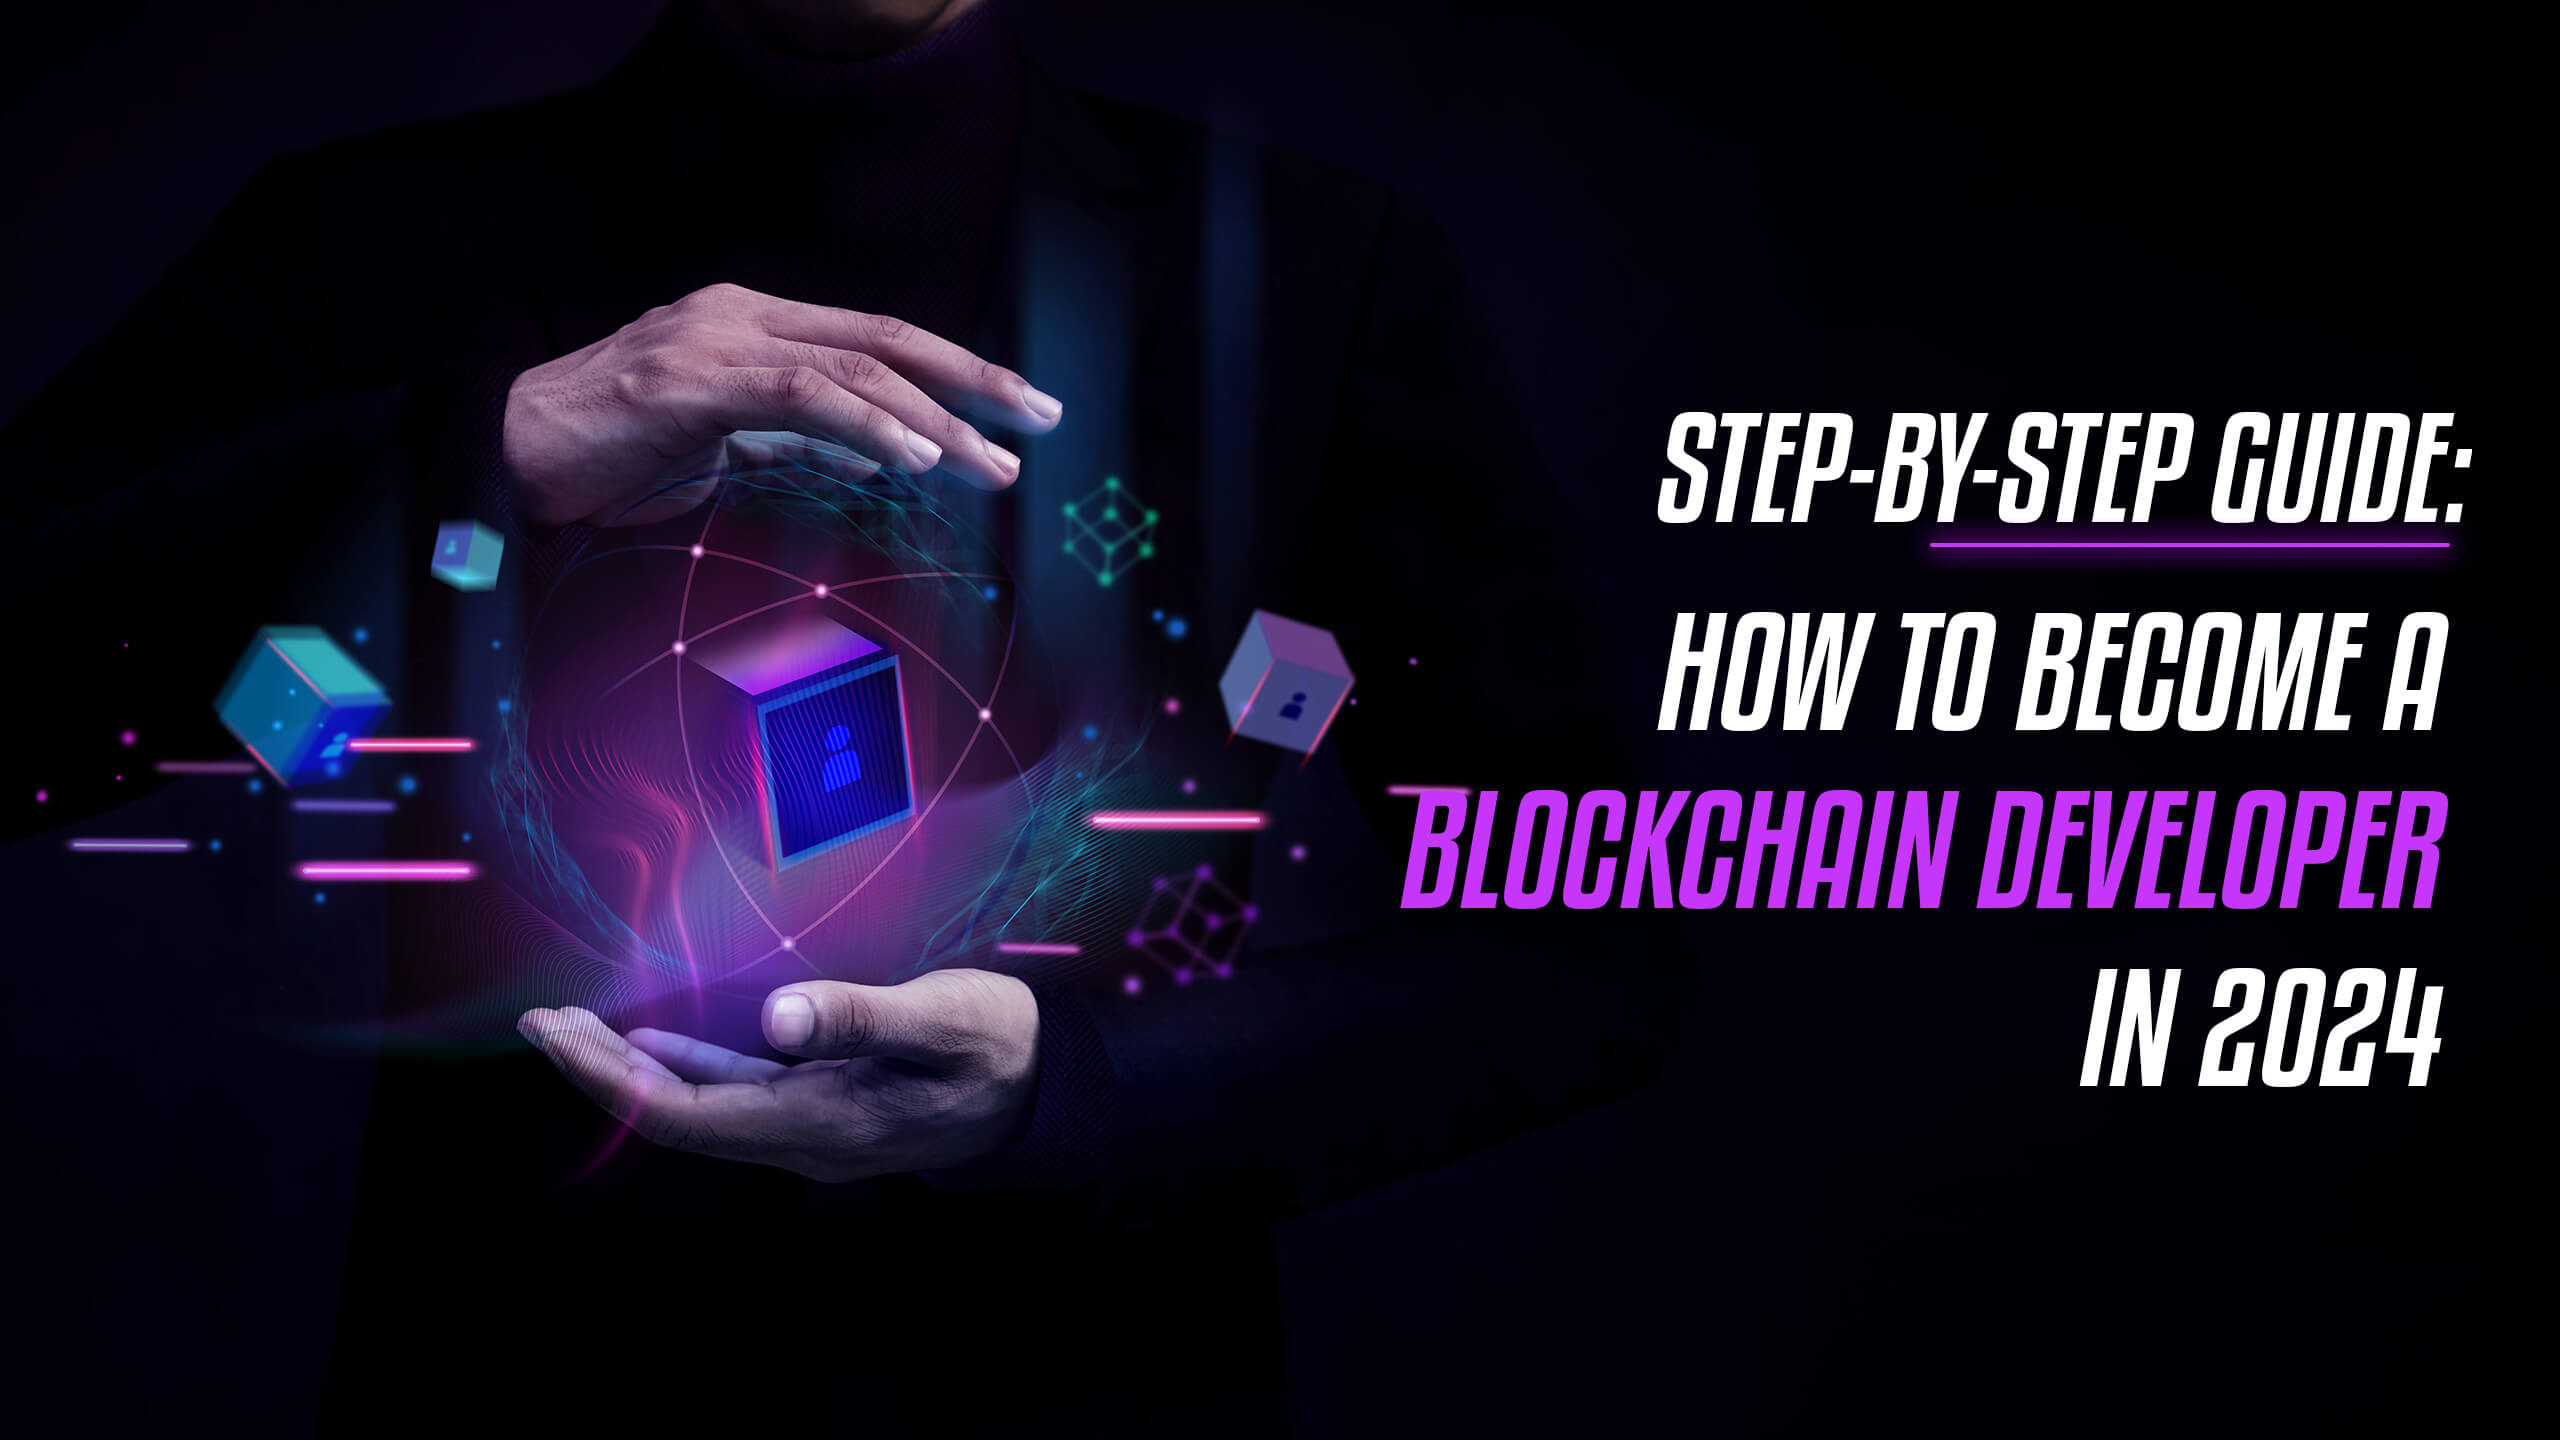 How to Become a Blockchain Developer in 2024